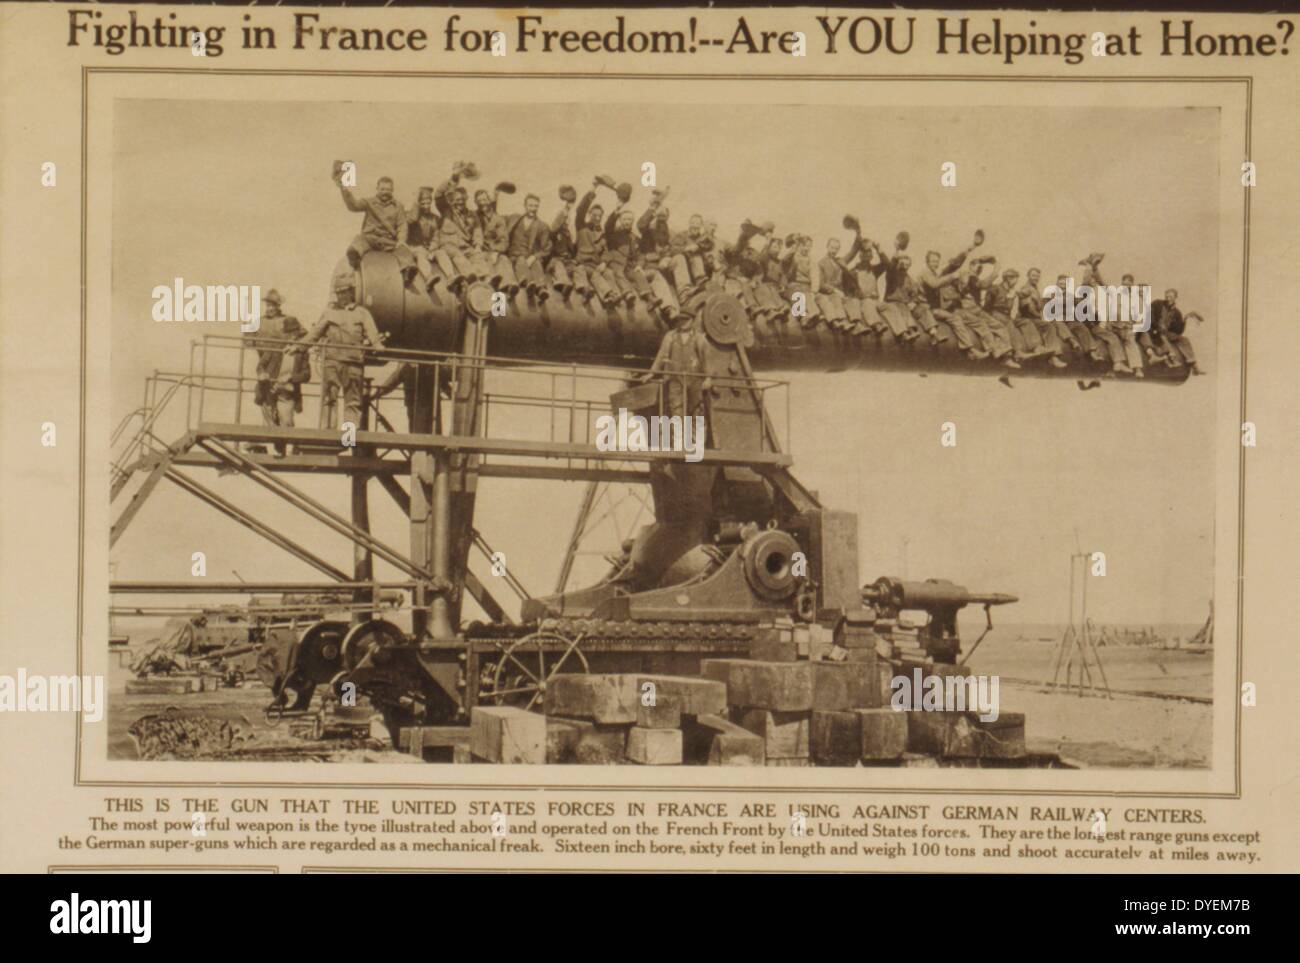 Fighting in France for freedom! Are you helping at home? a series of photographs published in the Illustrated Current News, [1918] Stock Photo